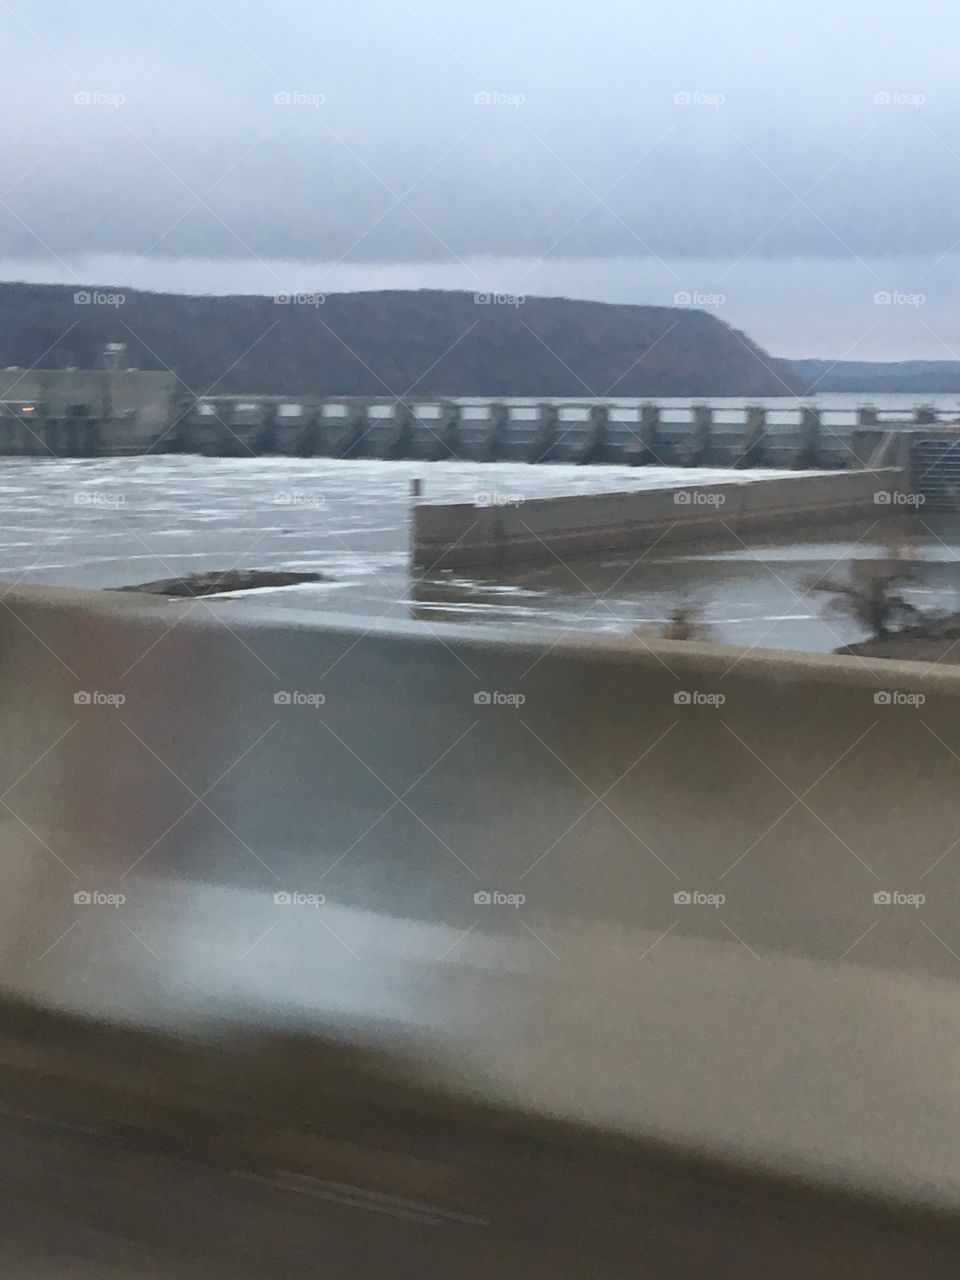 Kerr dam in Oklahoma on the way to in-laws for a get together before the holidays!